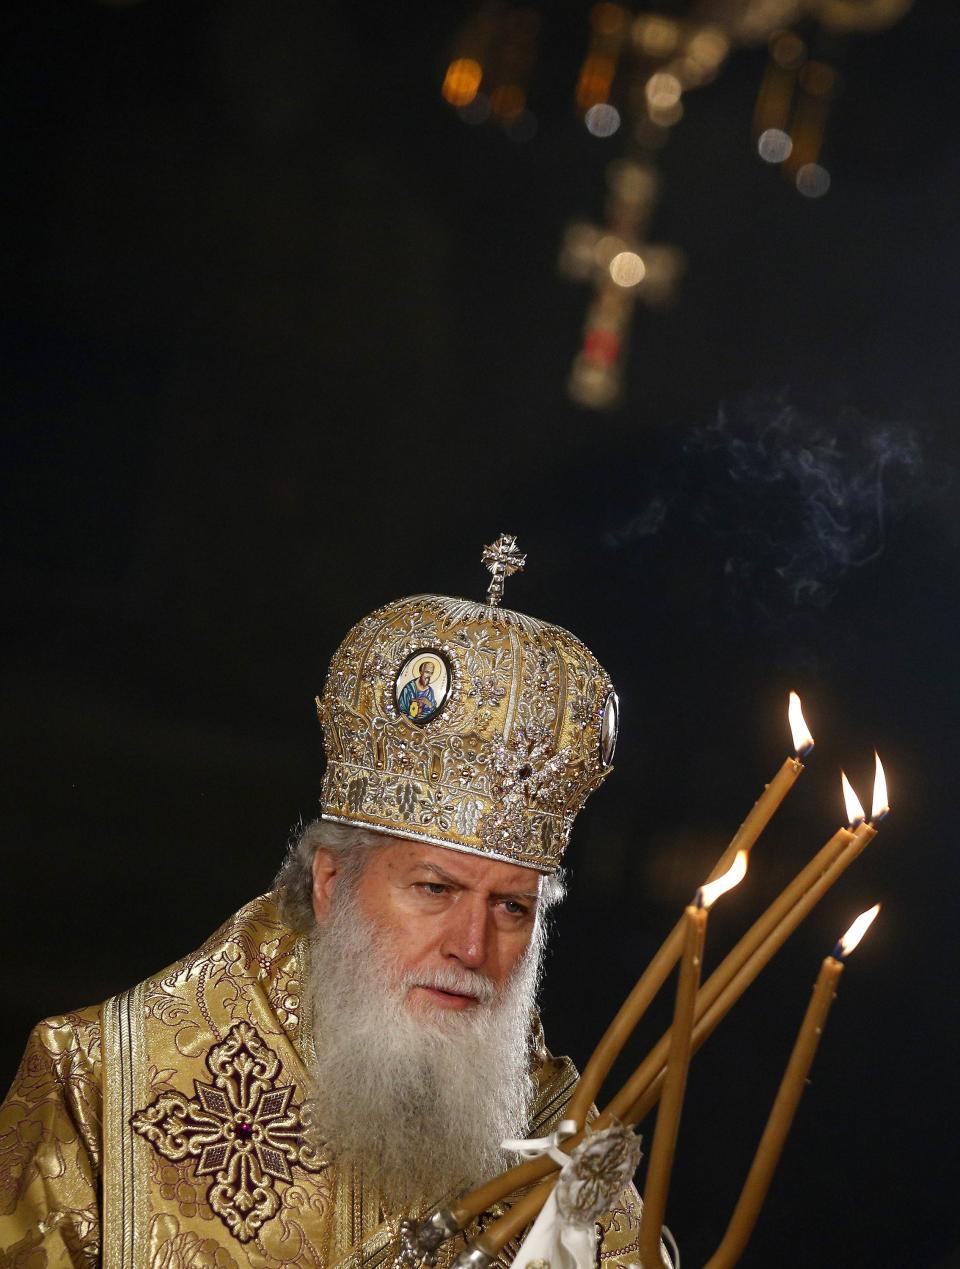 Bulgarian Patriarch Neofit leads a Christmas mass at Alexander Nevski Cathedral in Sofia December 25, 2013. Bulgaria, unlike some other Orthodox countries, celebrates Christmas on December 25. REUTERS/Stoyan Nenov (BULGARIA - Tags: RELIGION)